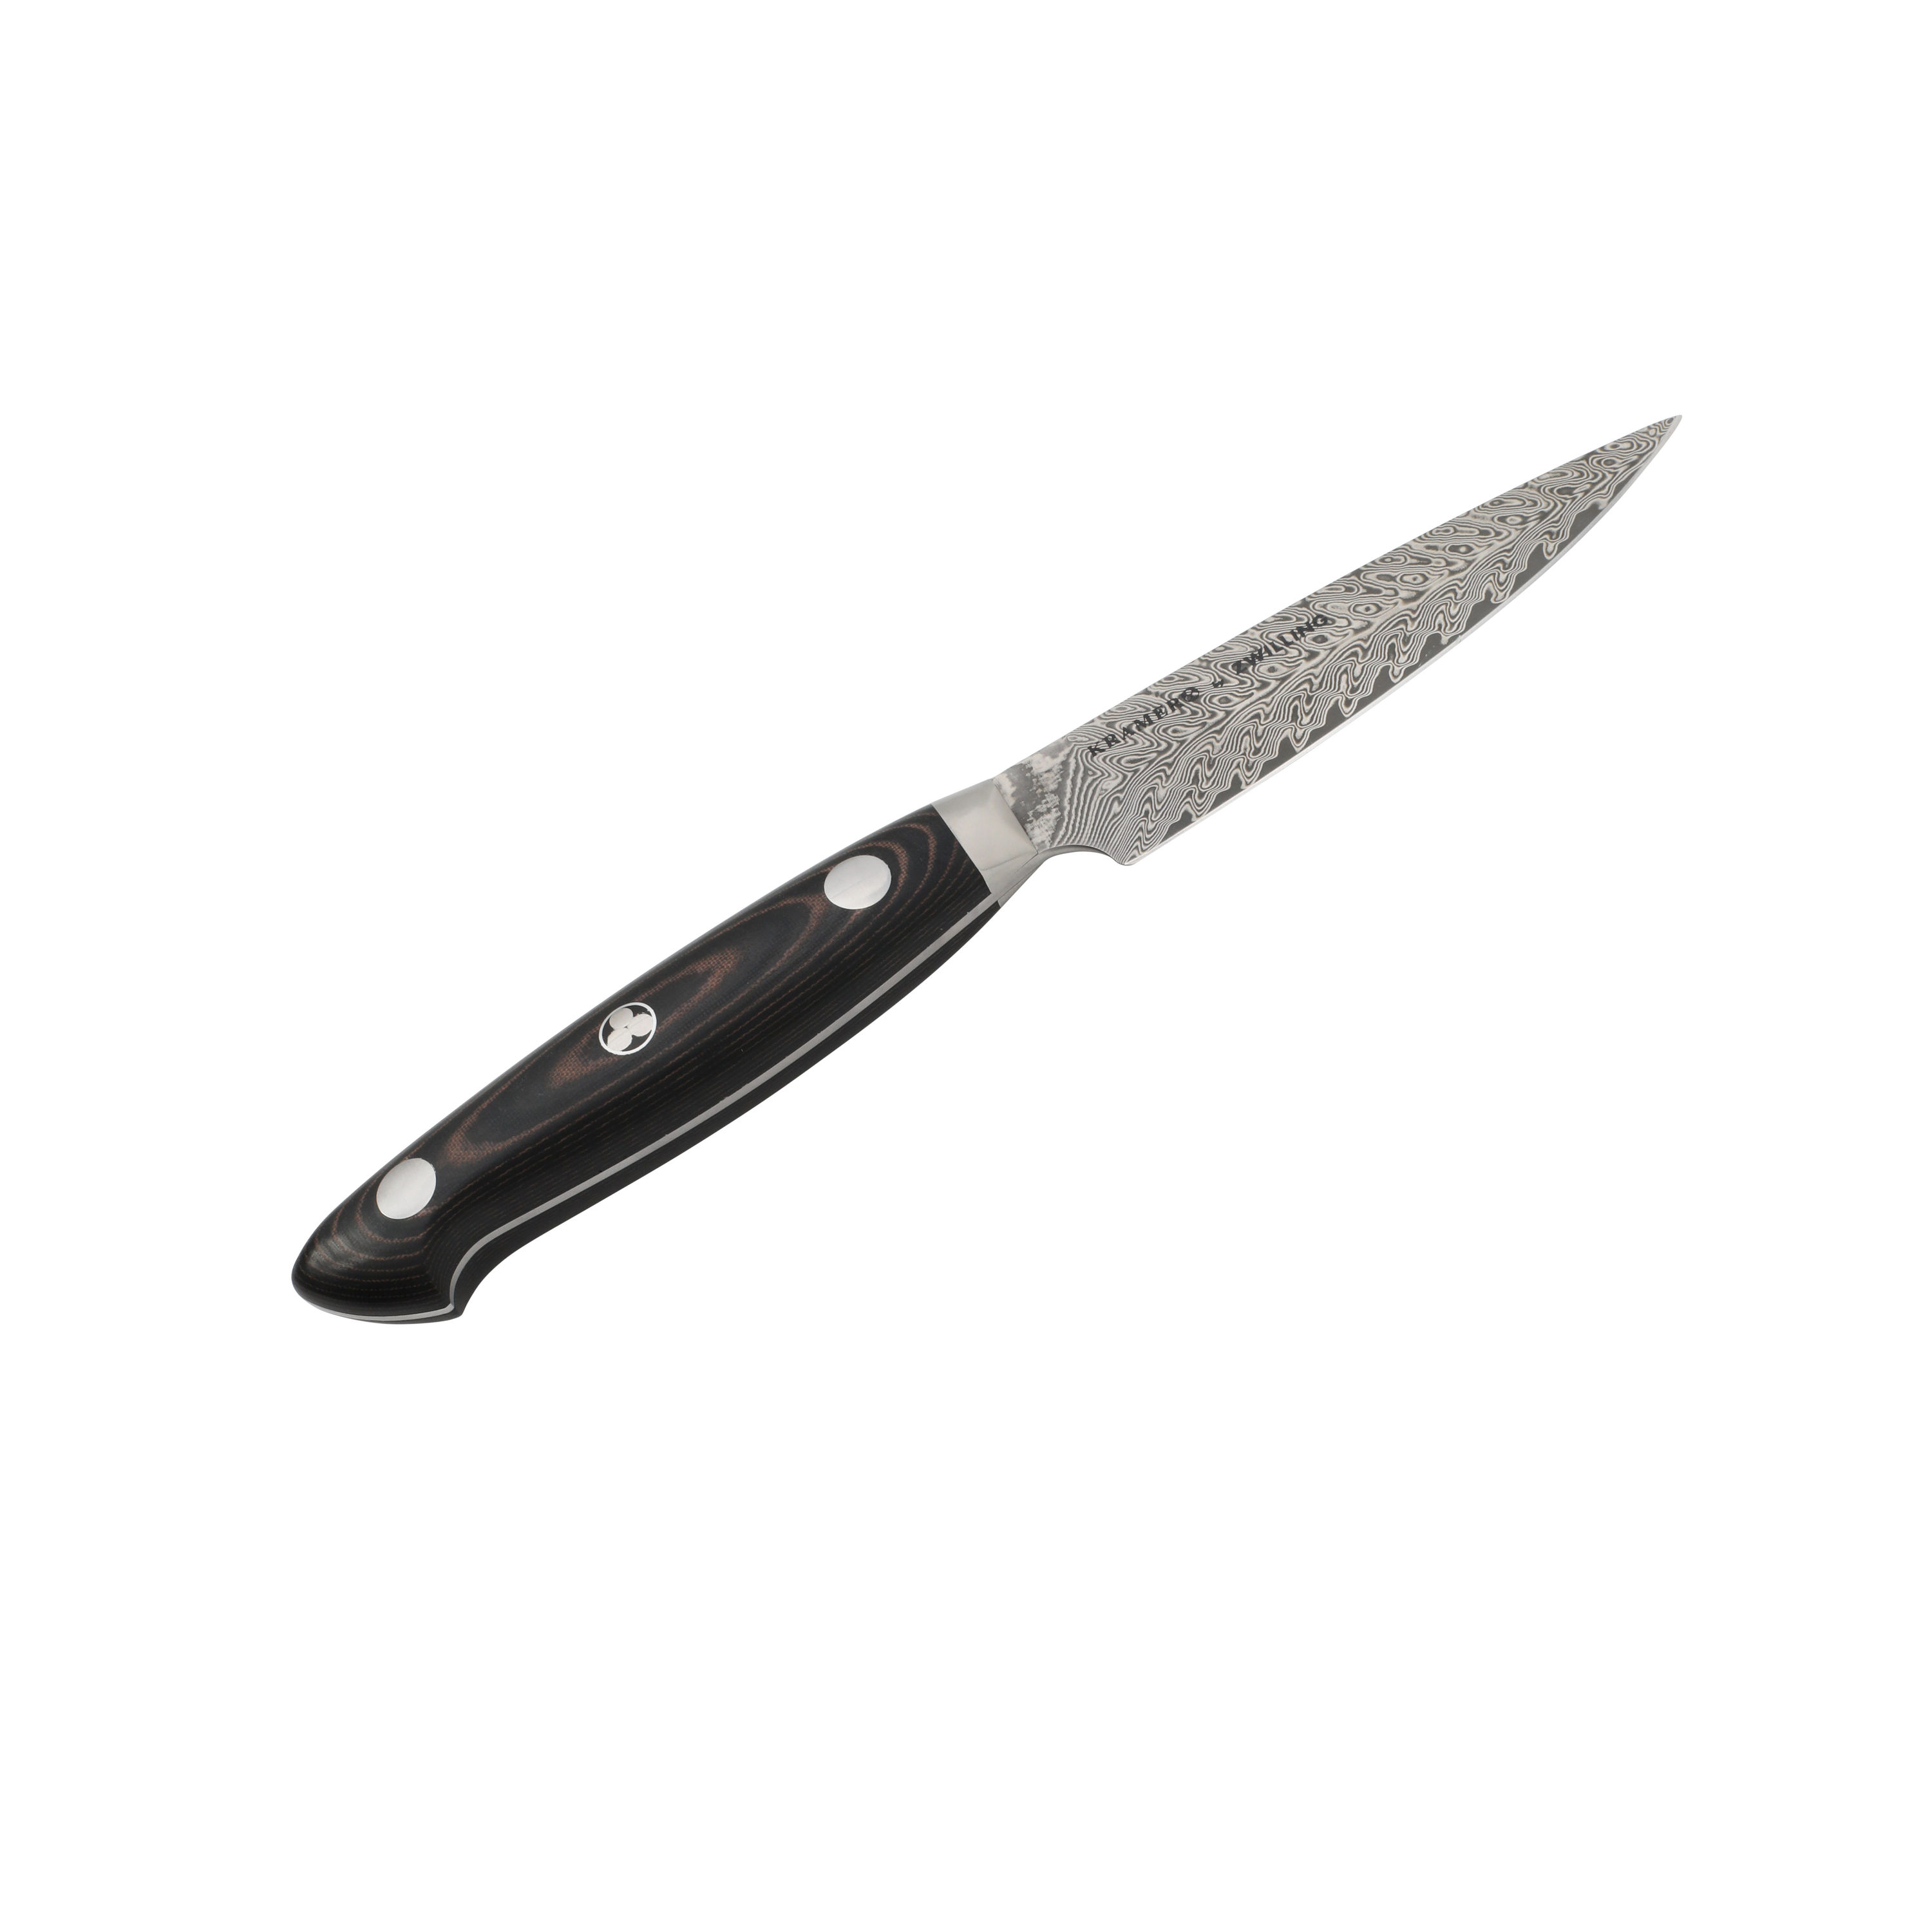 Zwilling 3.5 Paring Knife Black, Twin Grip Series